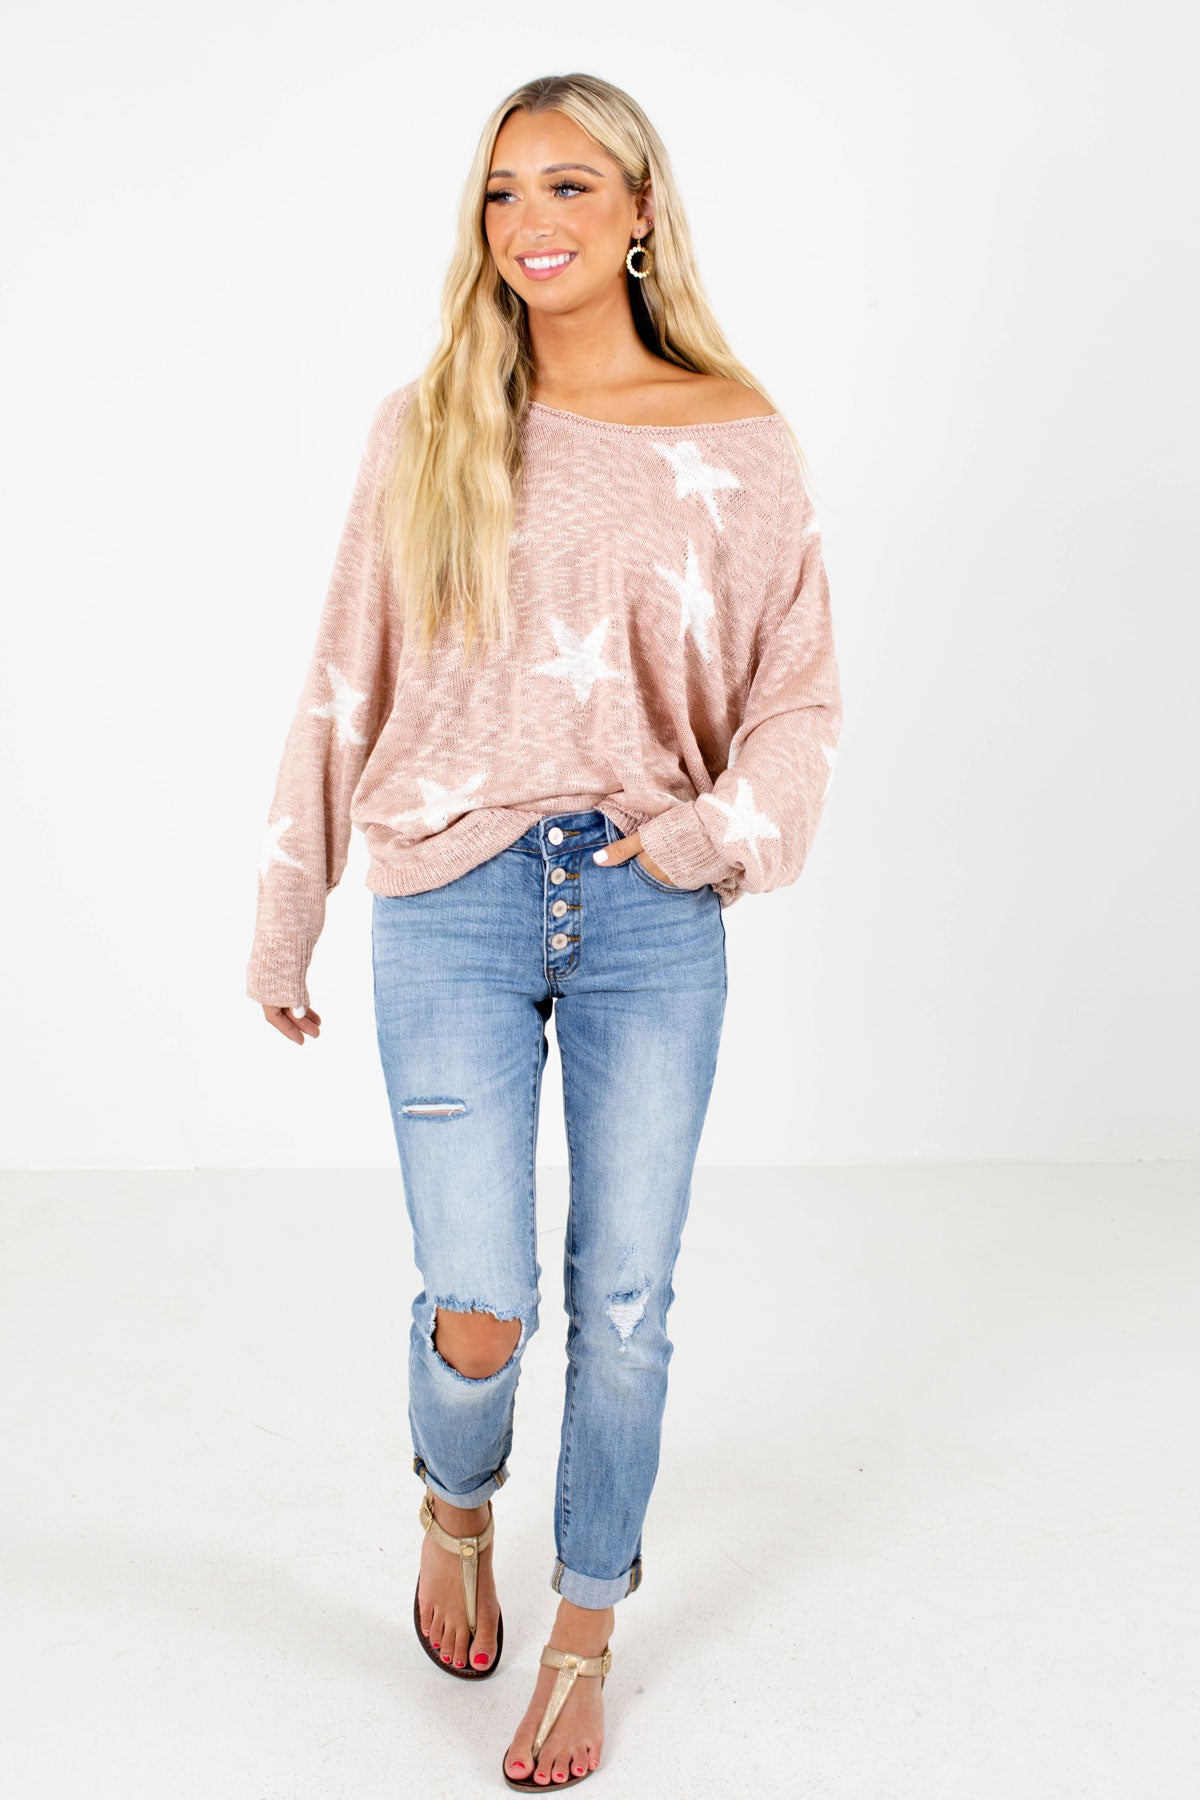 Pink Cute and Comfortable Boutique Knit Tops for Women